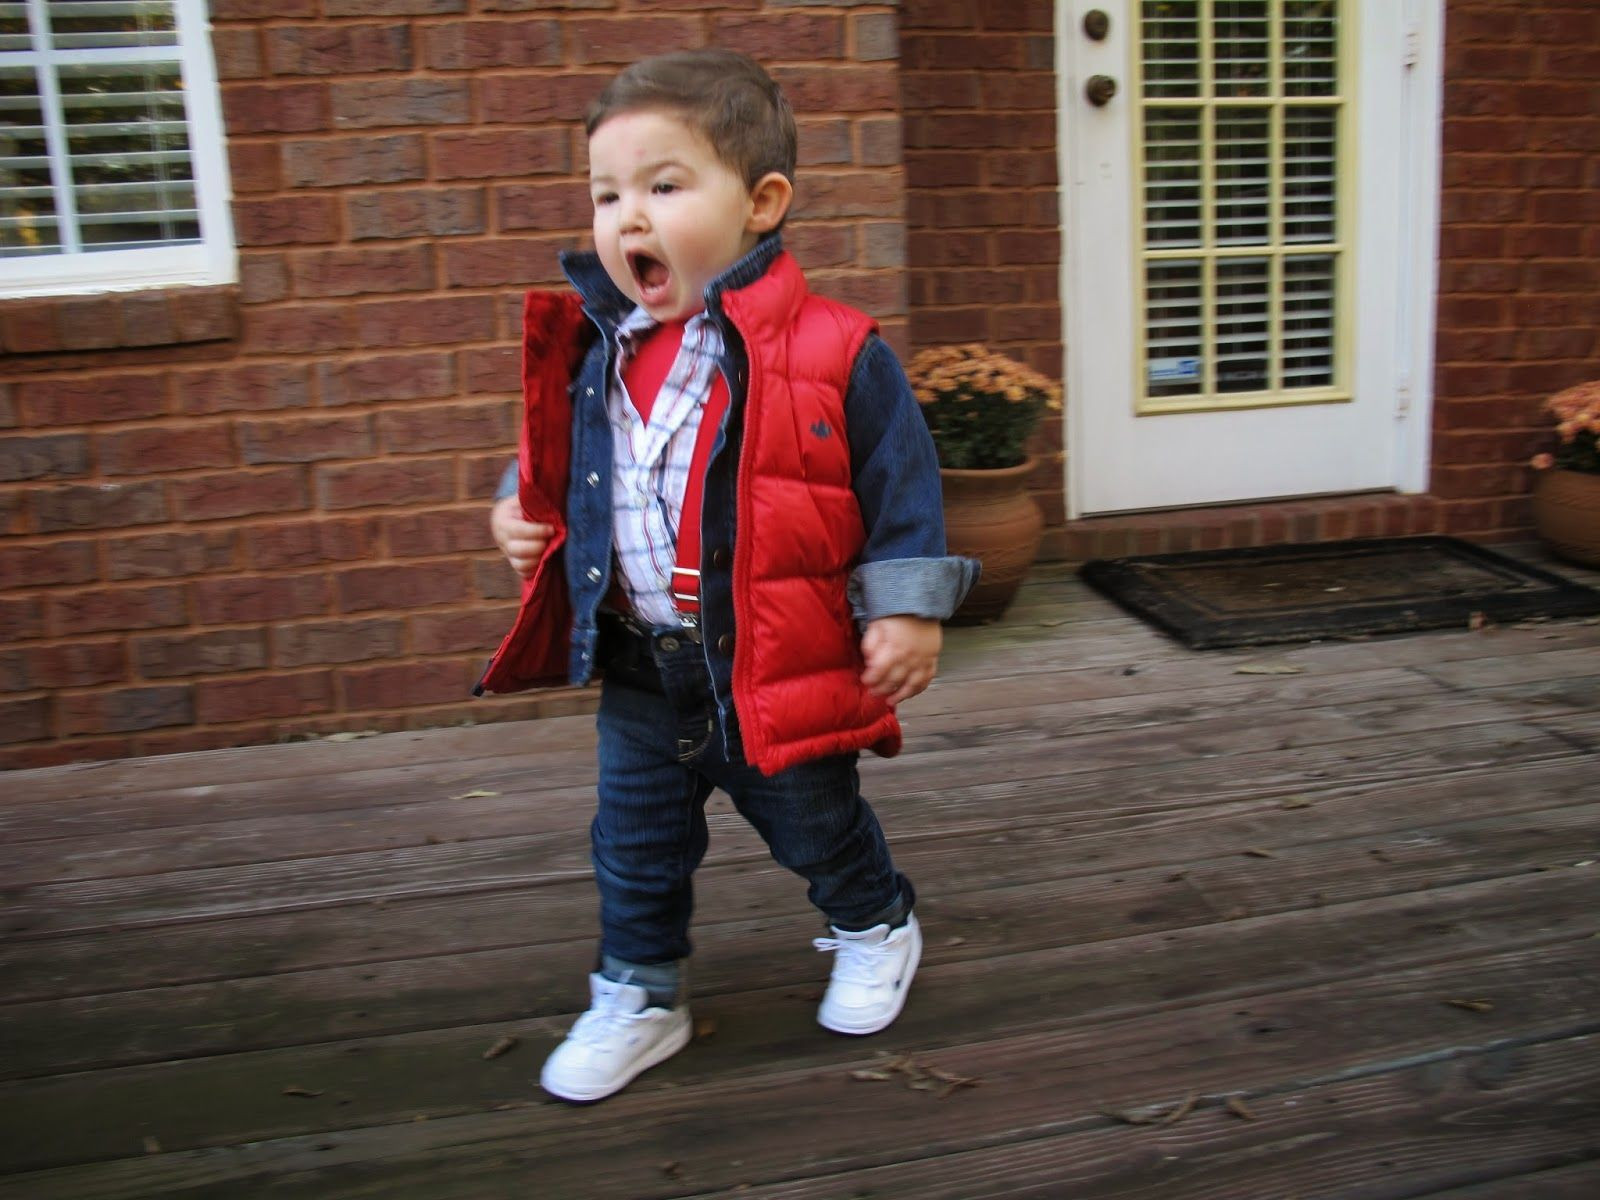 DIY Marty Mcfly Costume
 BABY MARTY MCFLY love and lion HOMEMADE HALLOWEEN